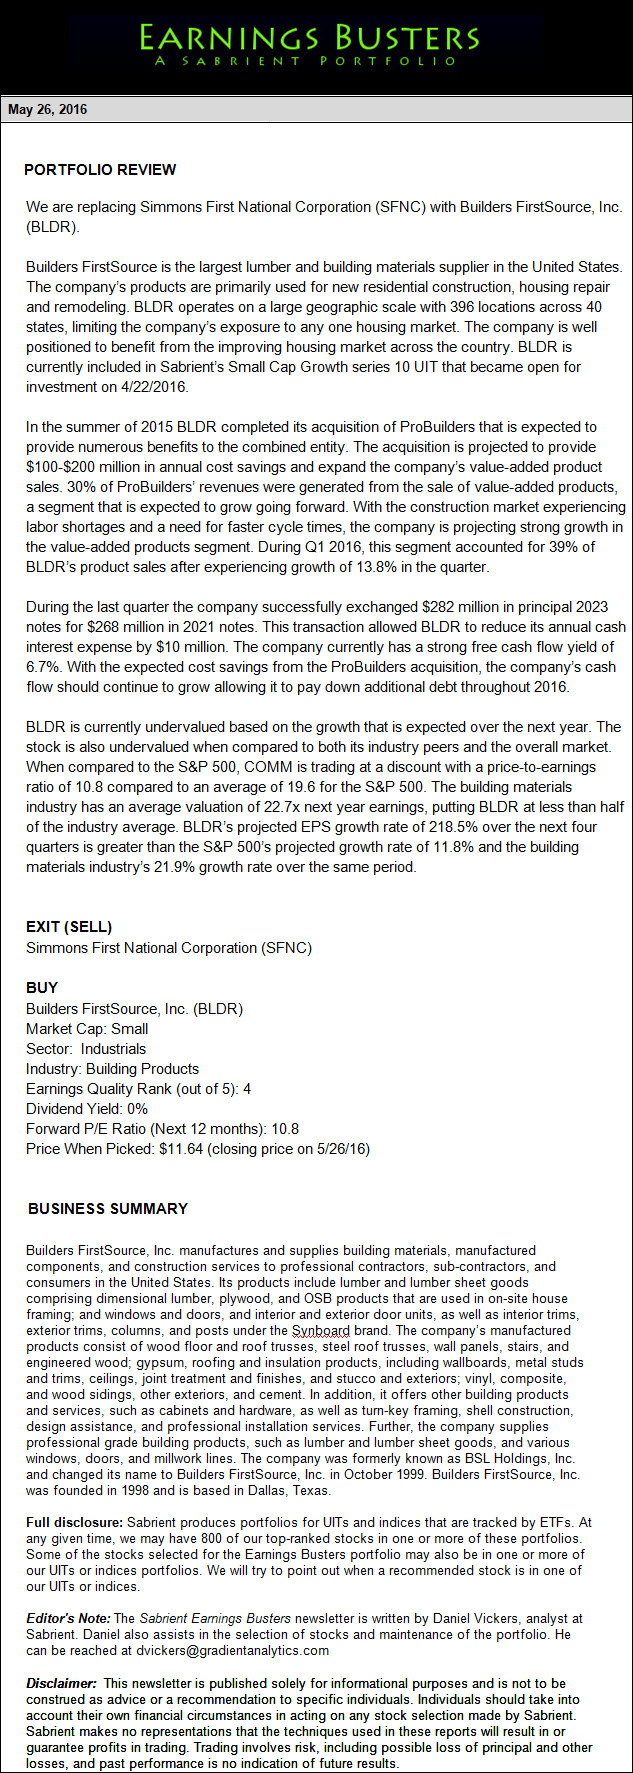 Earnings Busters Newsletter - May 26, 2016